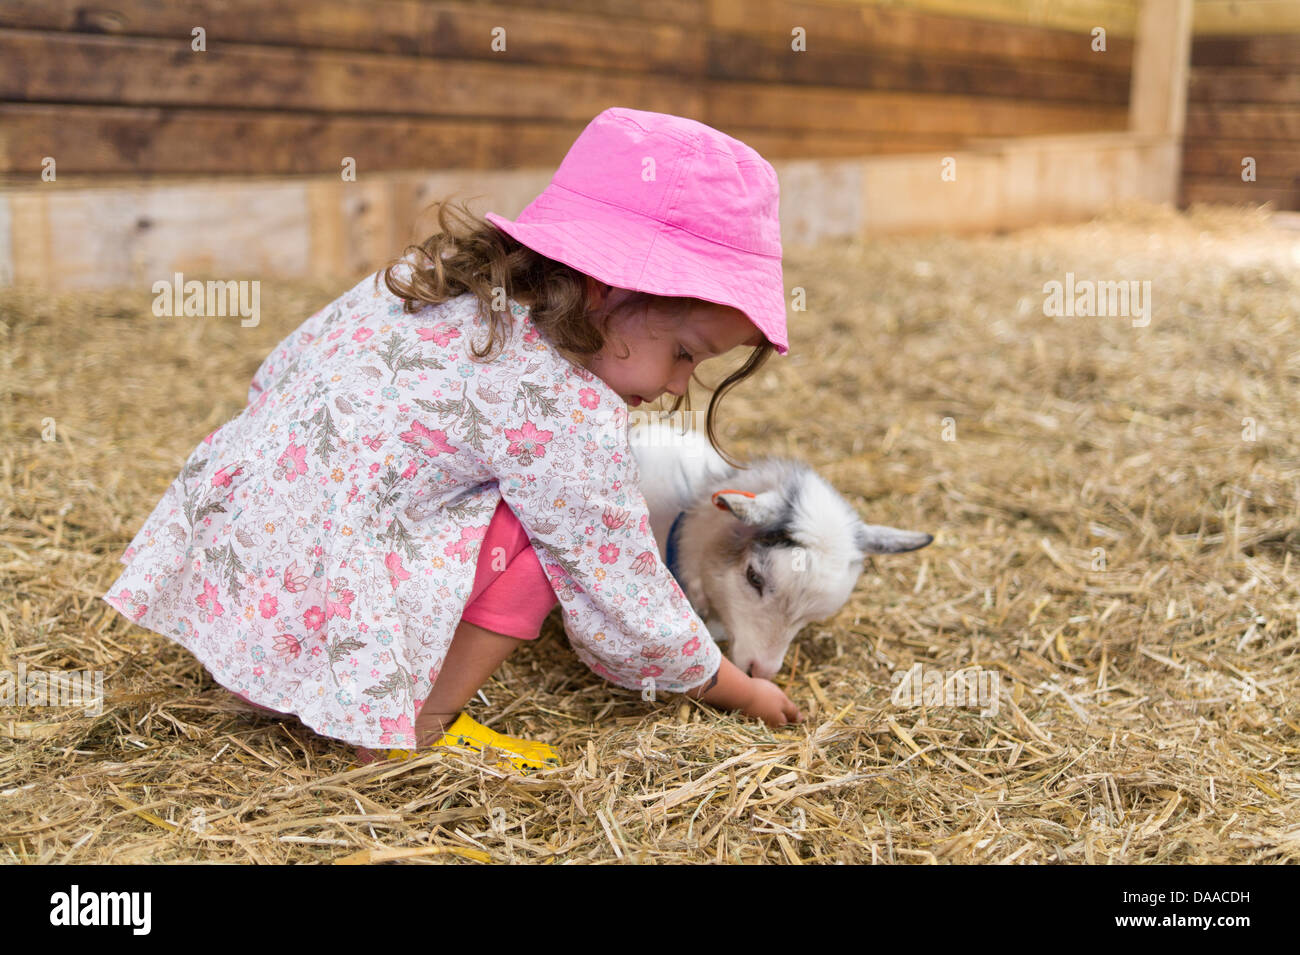 Four year old girl feeding a kid goat at a petting farm. Stock Photo